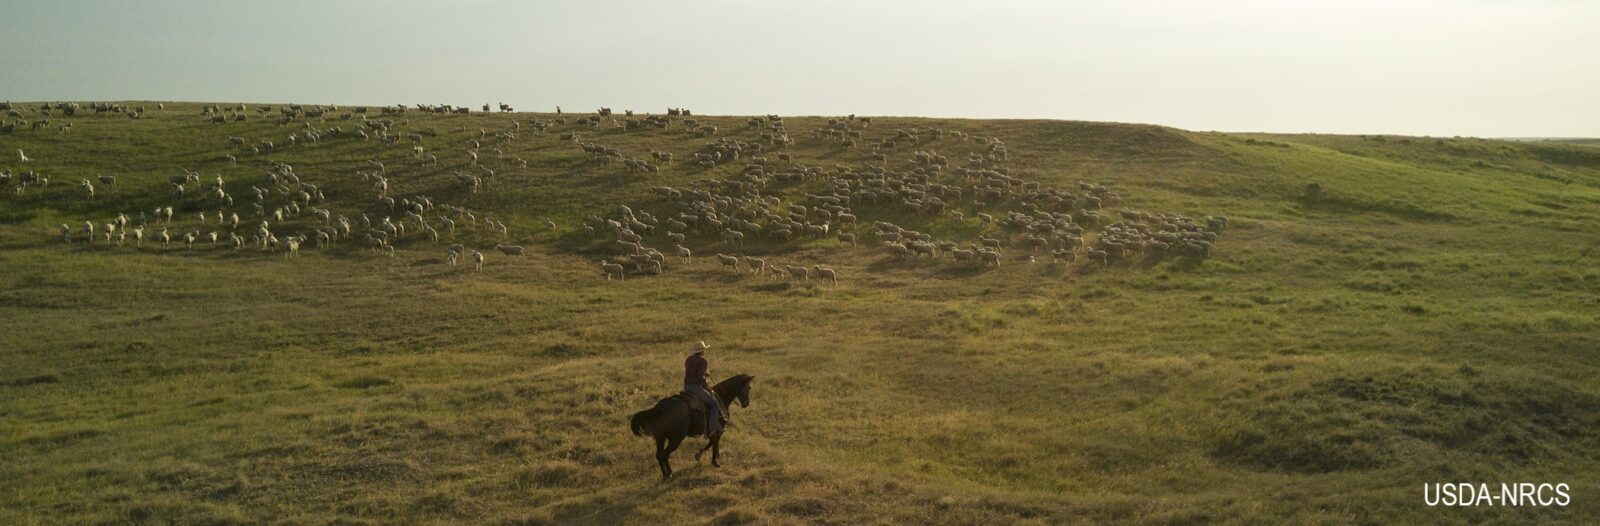 A person on a horse approaches a herd of sheep.